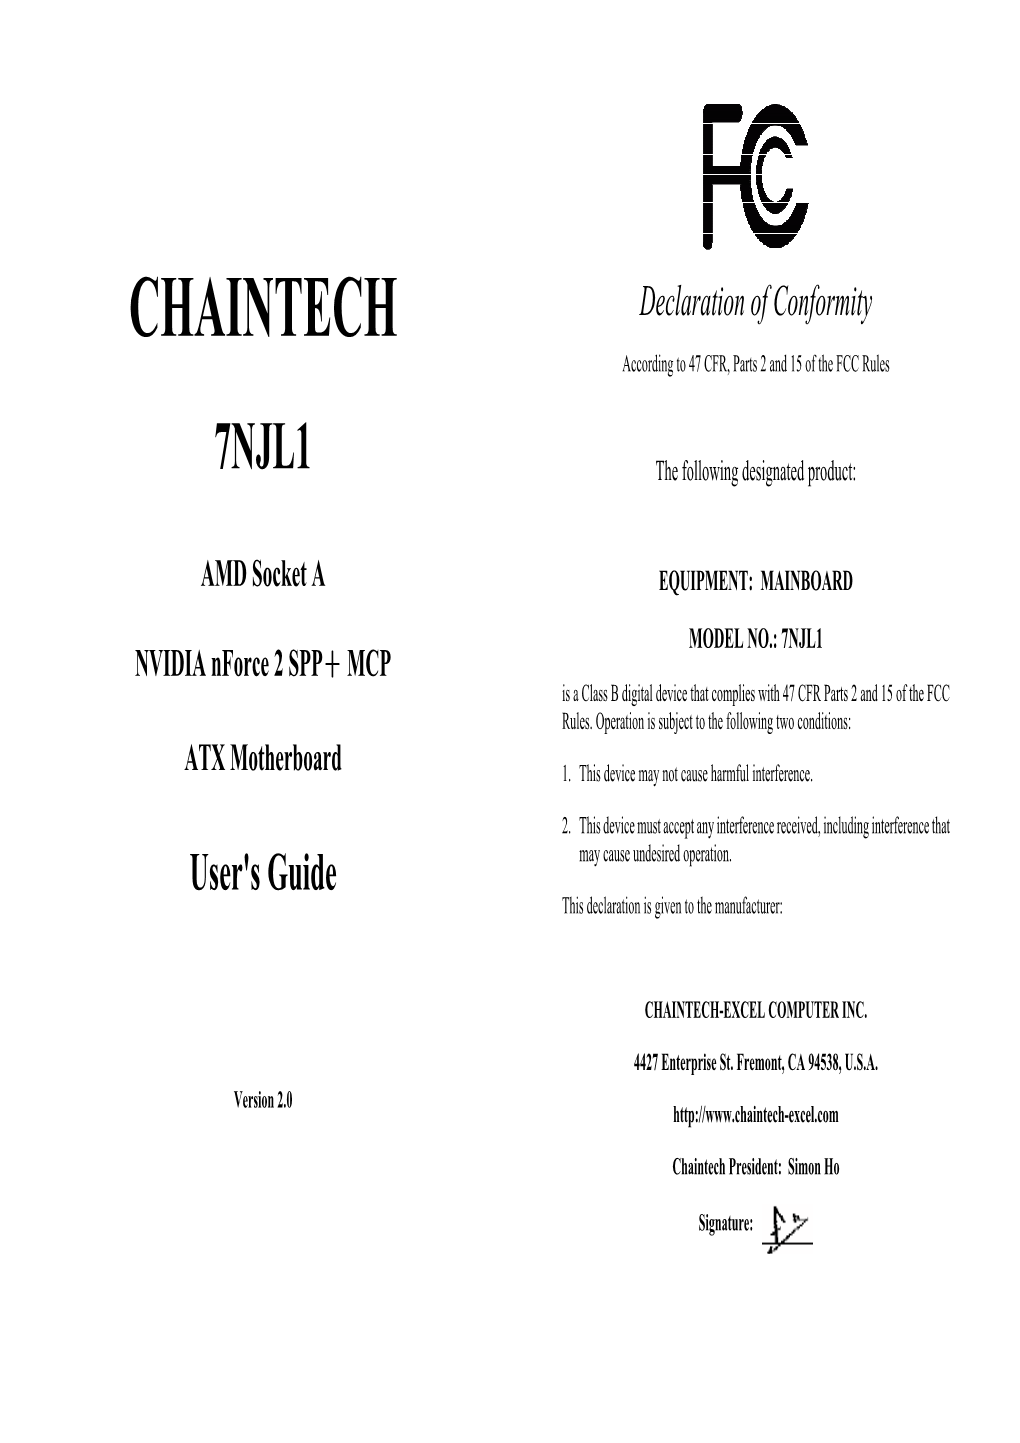 CHAINTECH Declaration of Conformity According to 47 CFR, Parts 2 and 15 of the FCC Rules